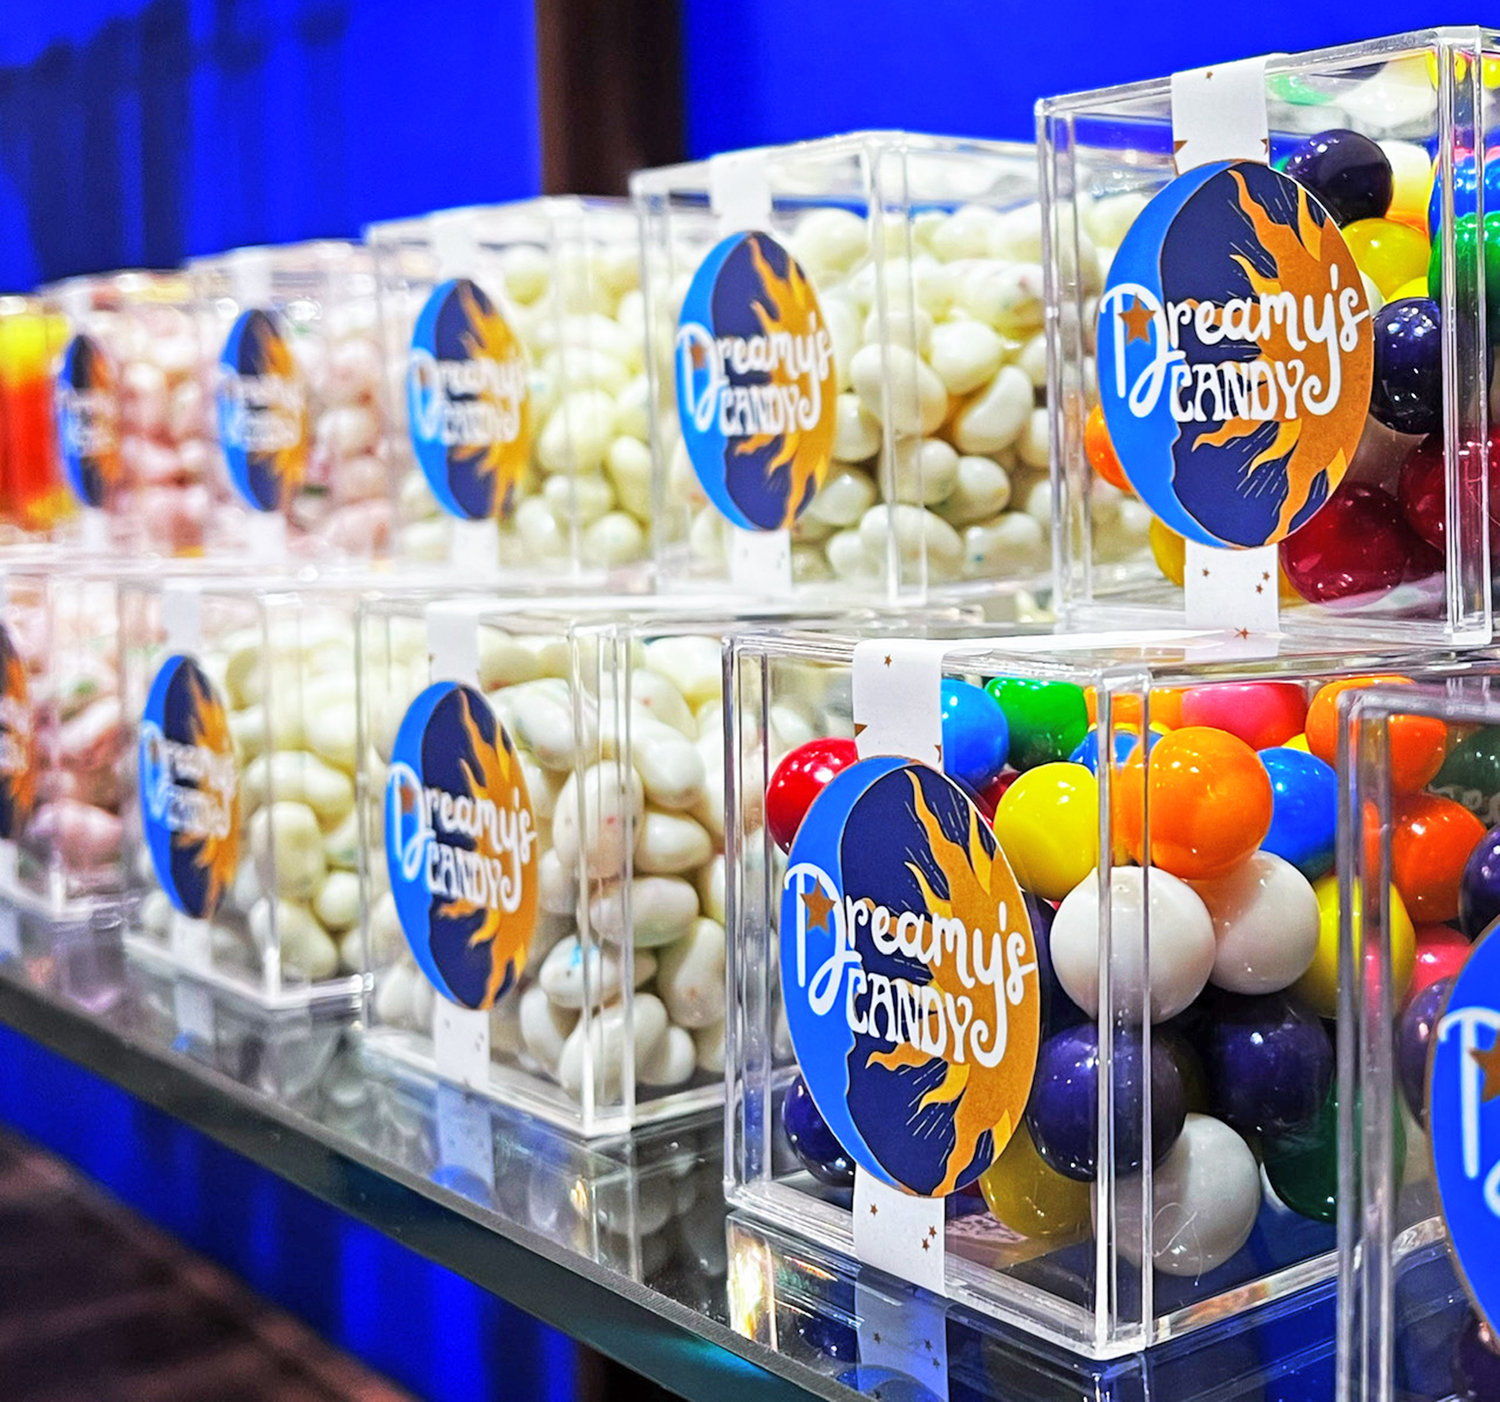 Gumballs, gourmet jelly beans and other confections available at Dreamy’s Candy, now open at 11 W. Park Row in Clinton.